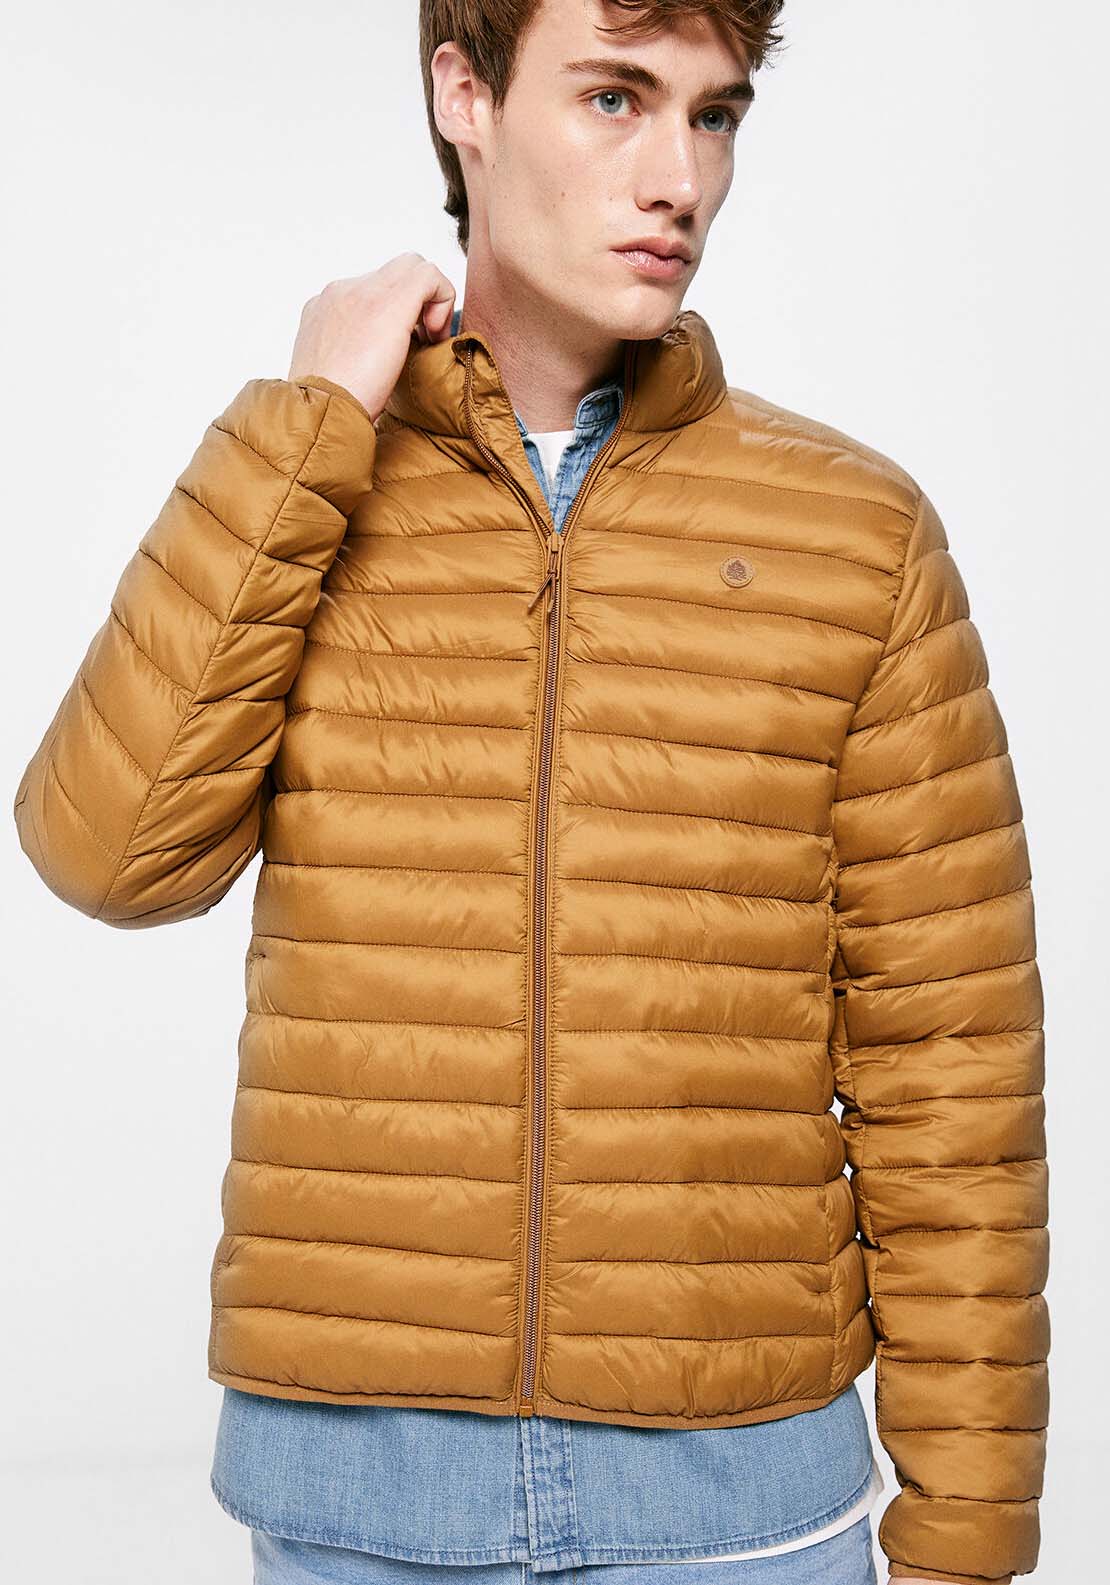 Springfield Quilted jacket - Tan 4 Shaws Department Stores